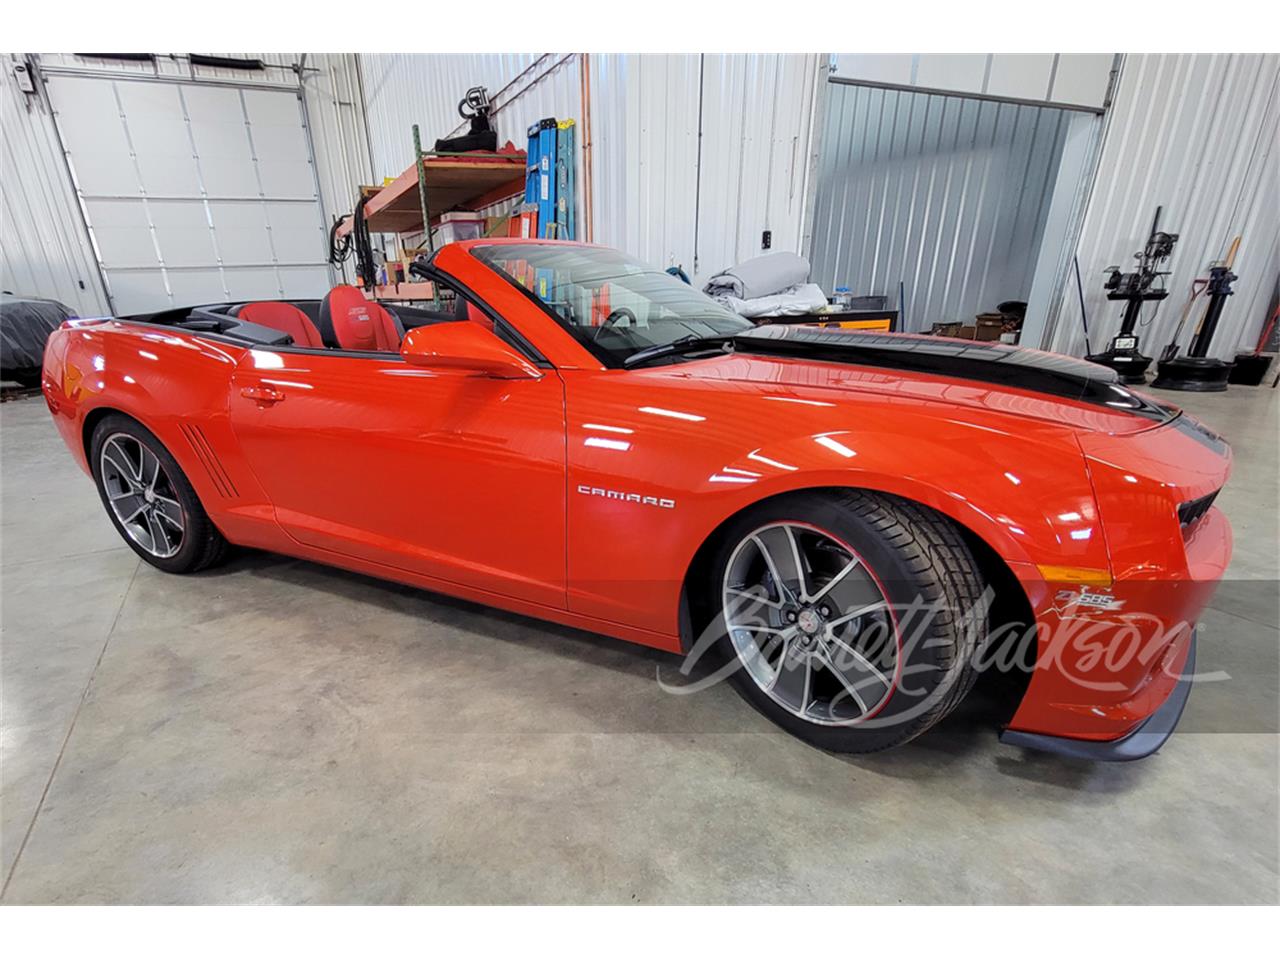 For Sale at Auction: 2011 Chevrolet Camaro in Scottsdale, Arizona for sale in Scottsdale, AZ